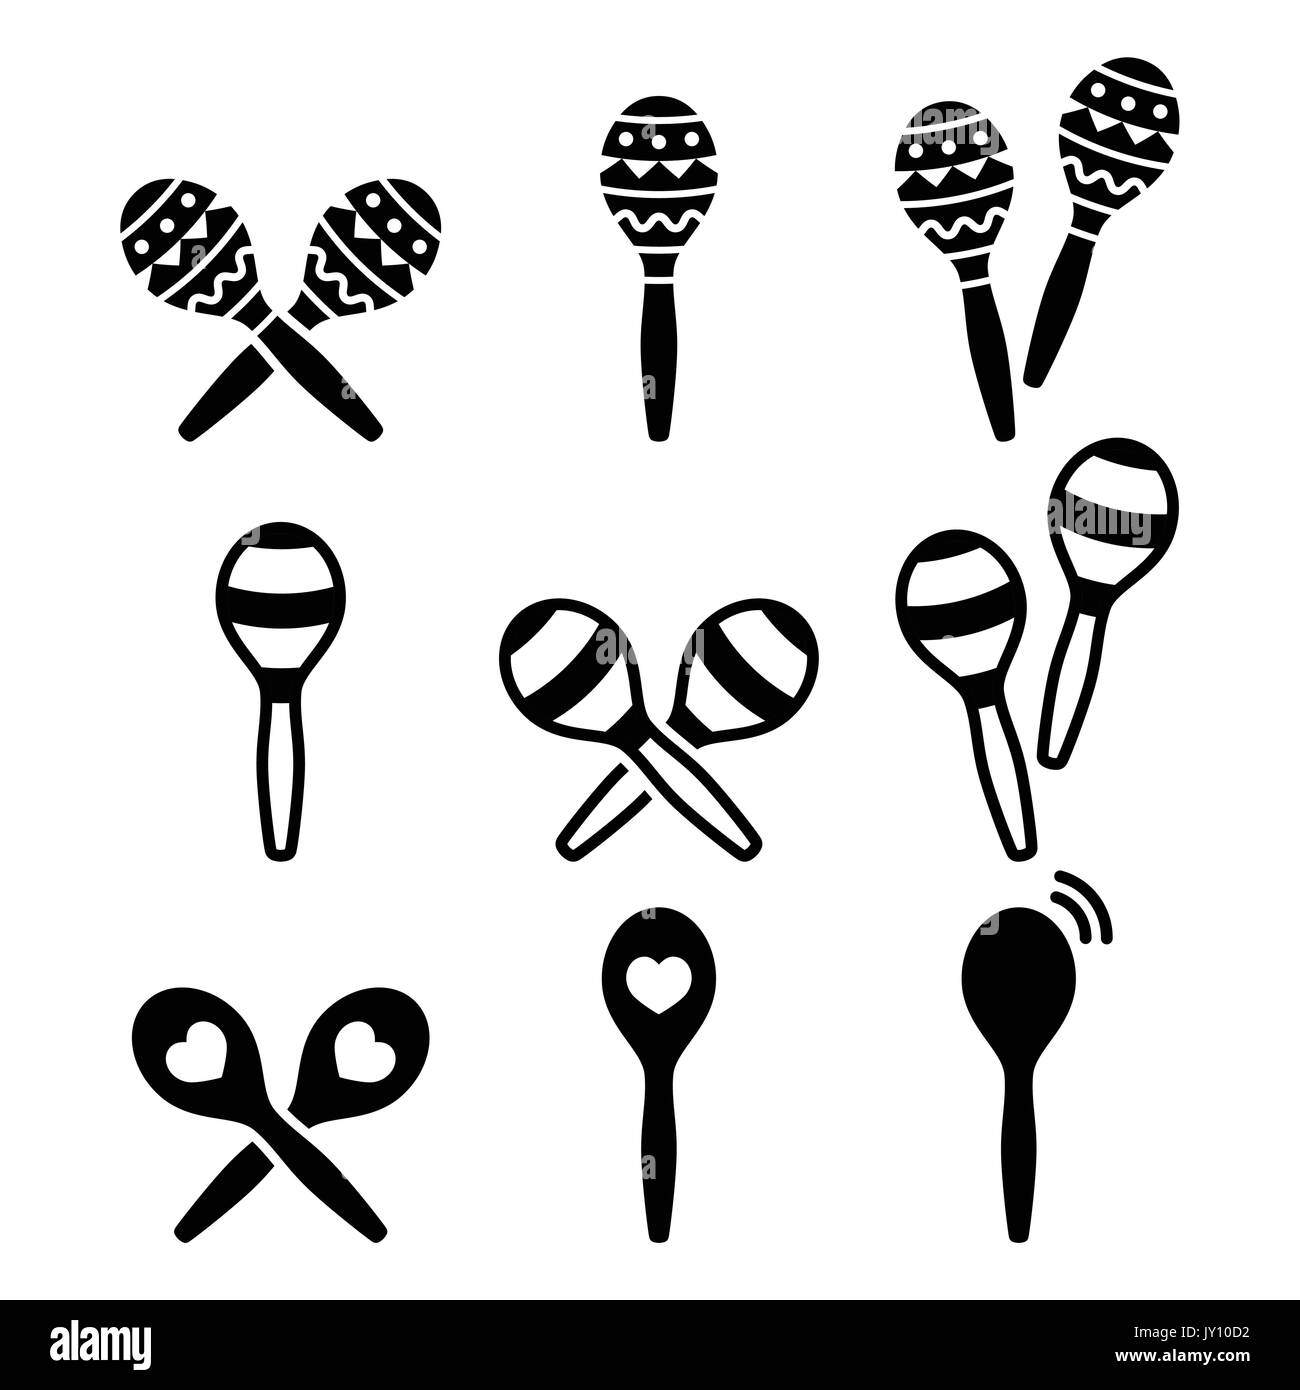 Maracas, Spanish or Rumba shakers icons set    Vector icons set of rattles - Maraca isolated on white Stock Vector